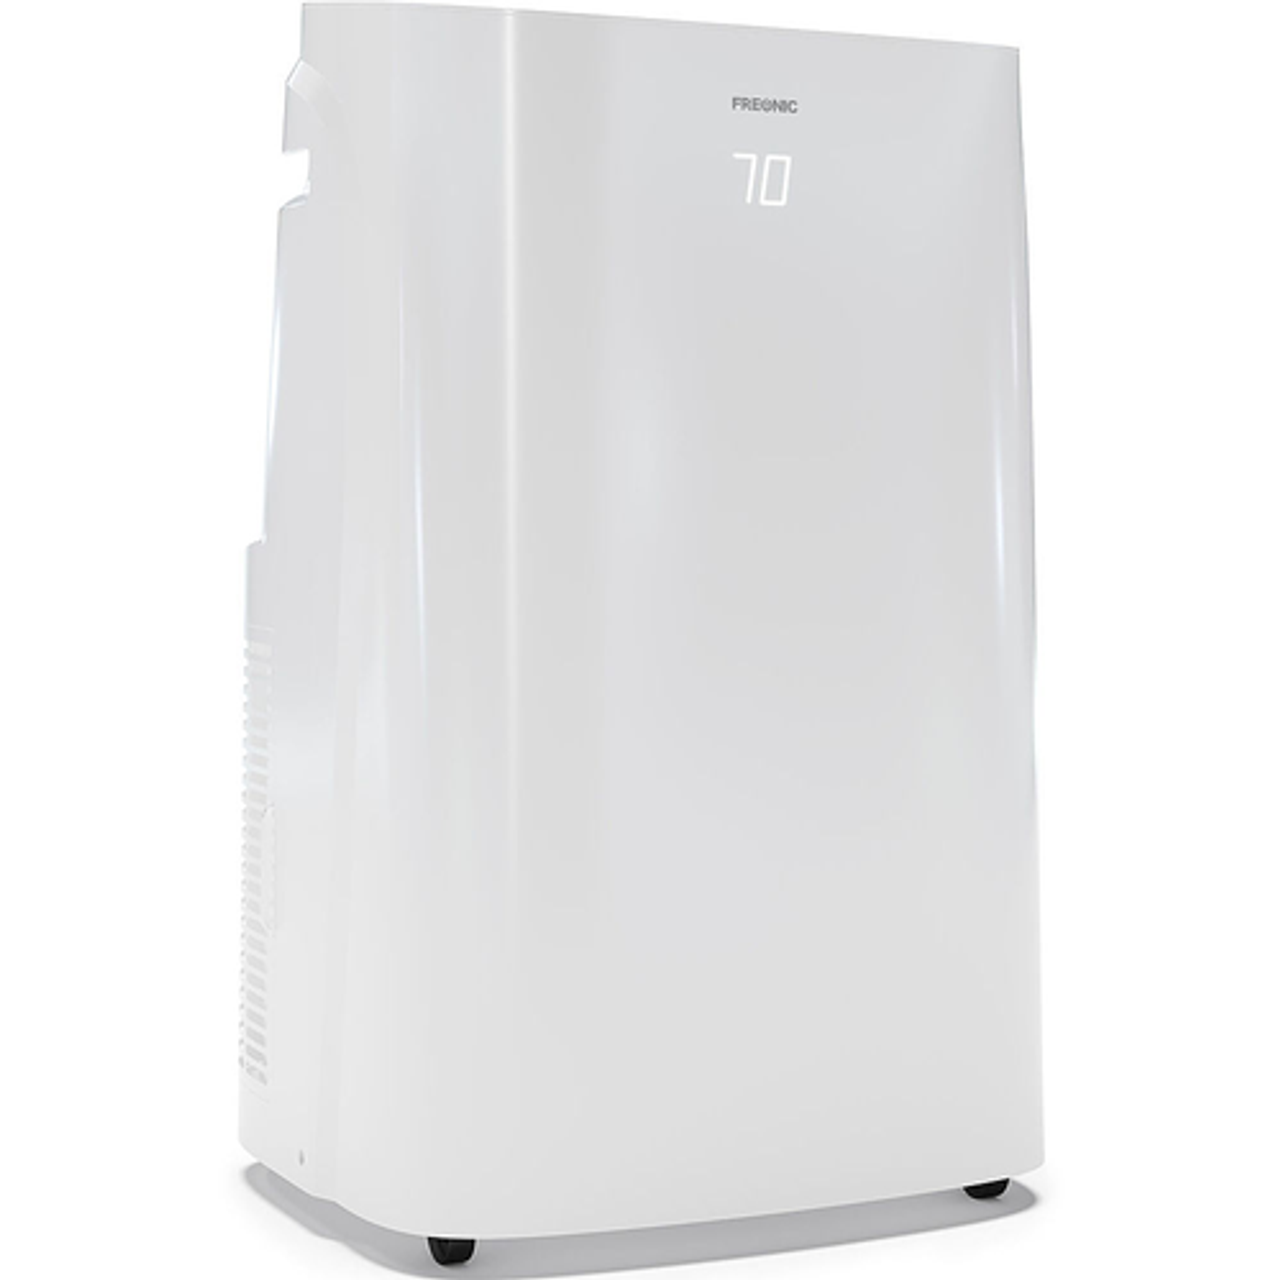 Freonic - 10,000 BTU Portable Air Conditioner | AC for Rooms up to 450 Sq.Ft. | LED Display | Sleep Mode | Dehumidifier - White